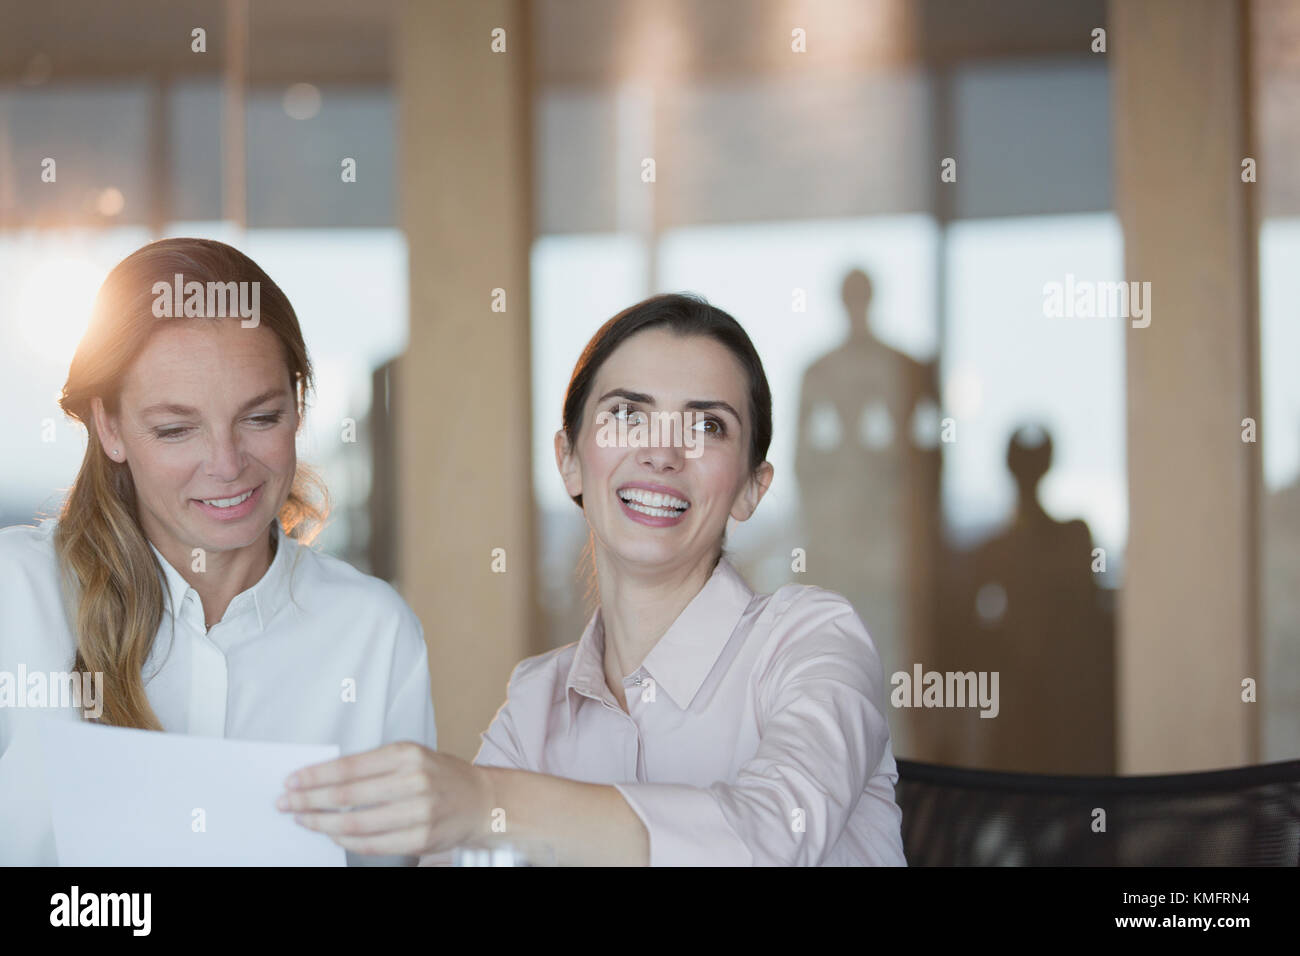 Smiling, enthusiastic businesswoman in conference room meeting Stock Photo